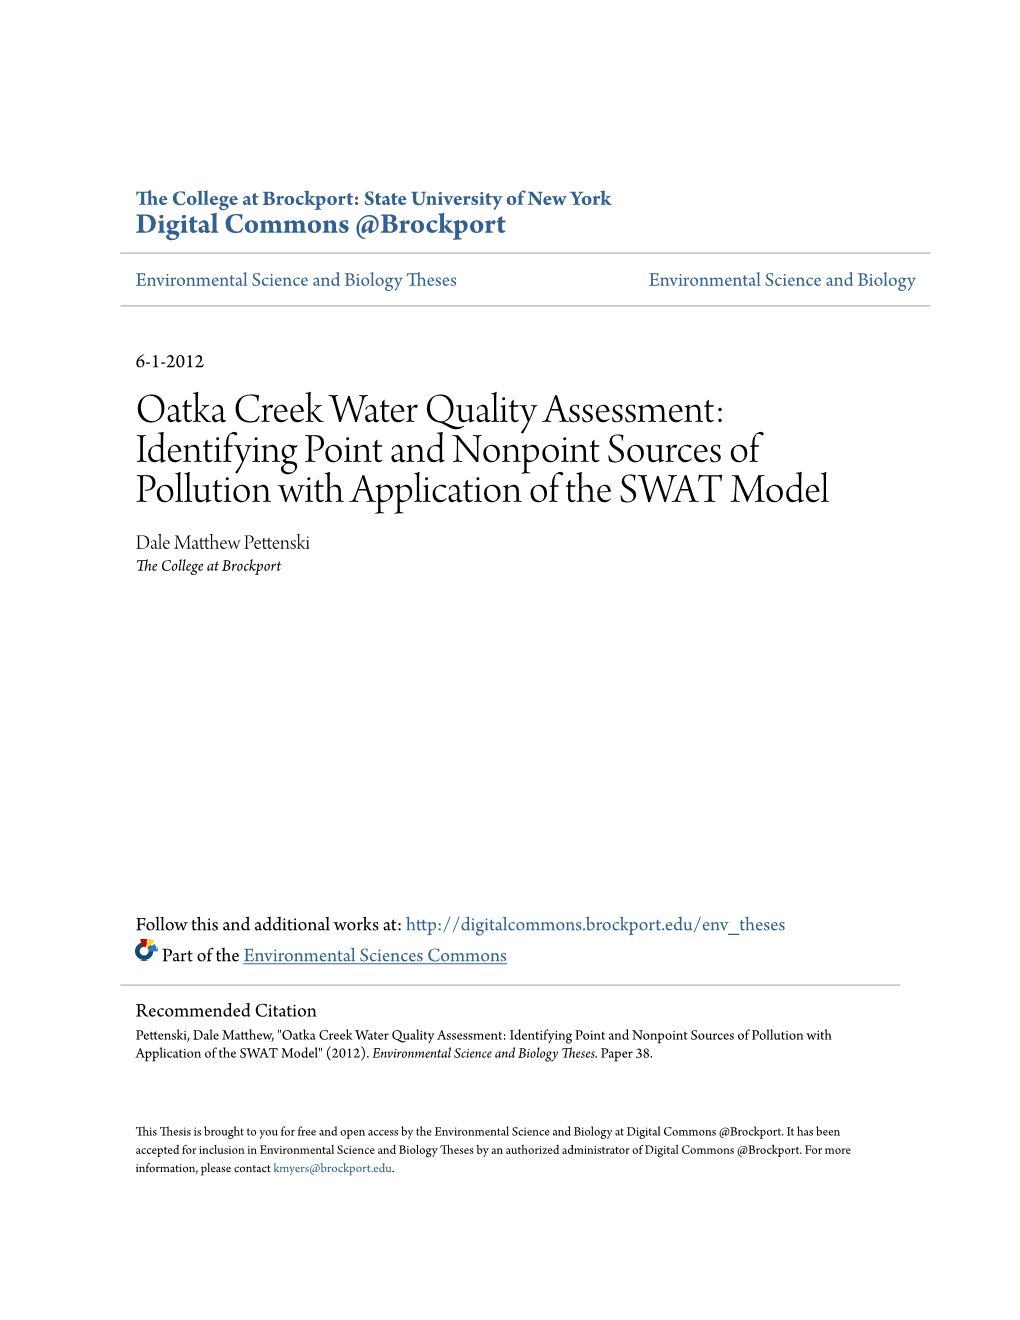 Oatka Creek Water Quality Assessment: Identifying Point And